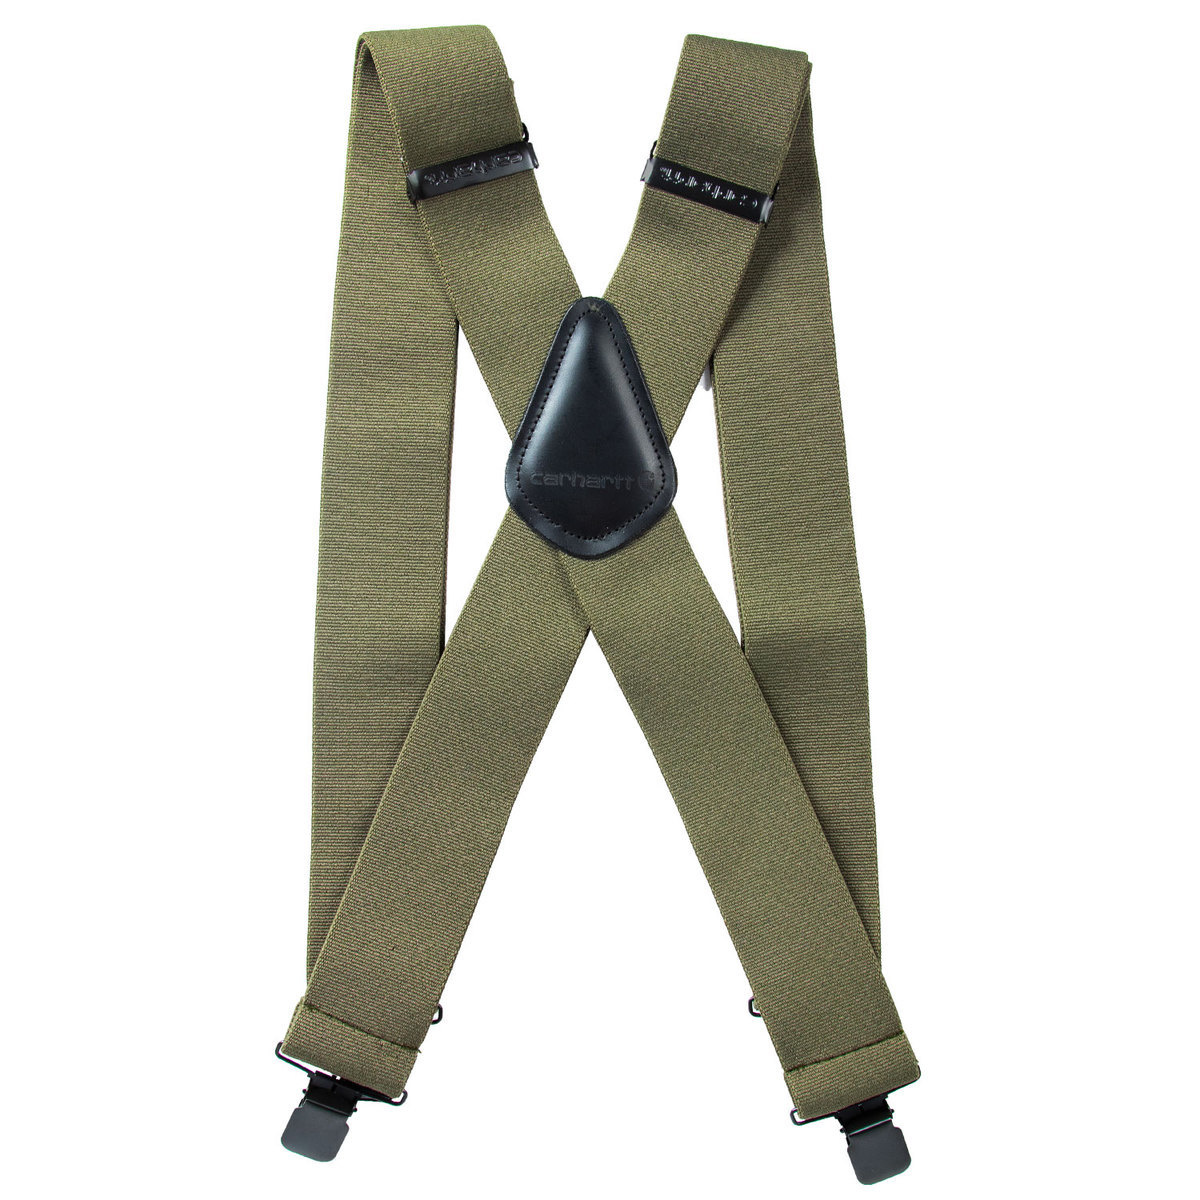 Carhartt Men's Utility Suspenders - Traditions Clothing & Gift Shop